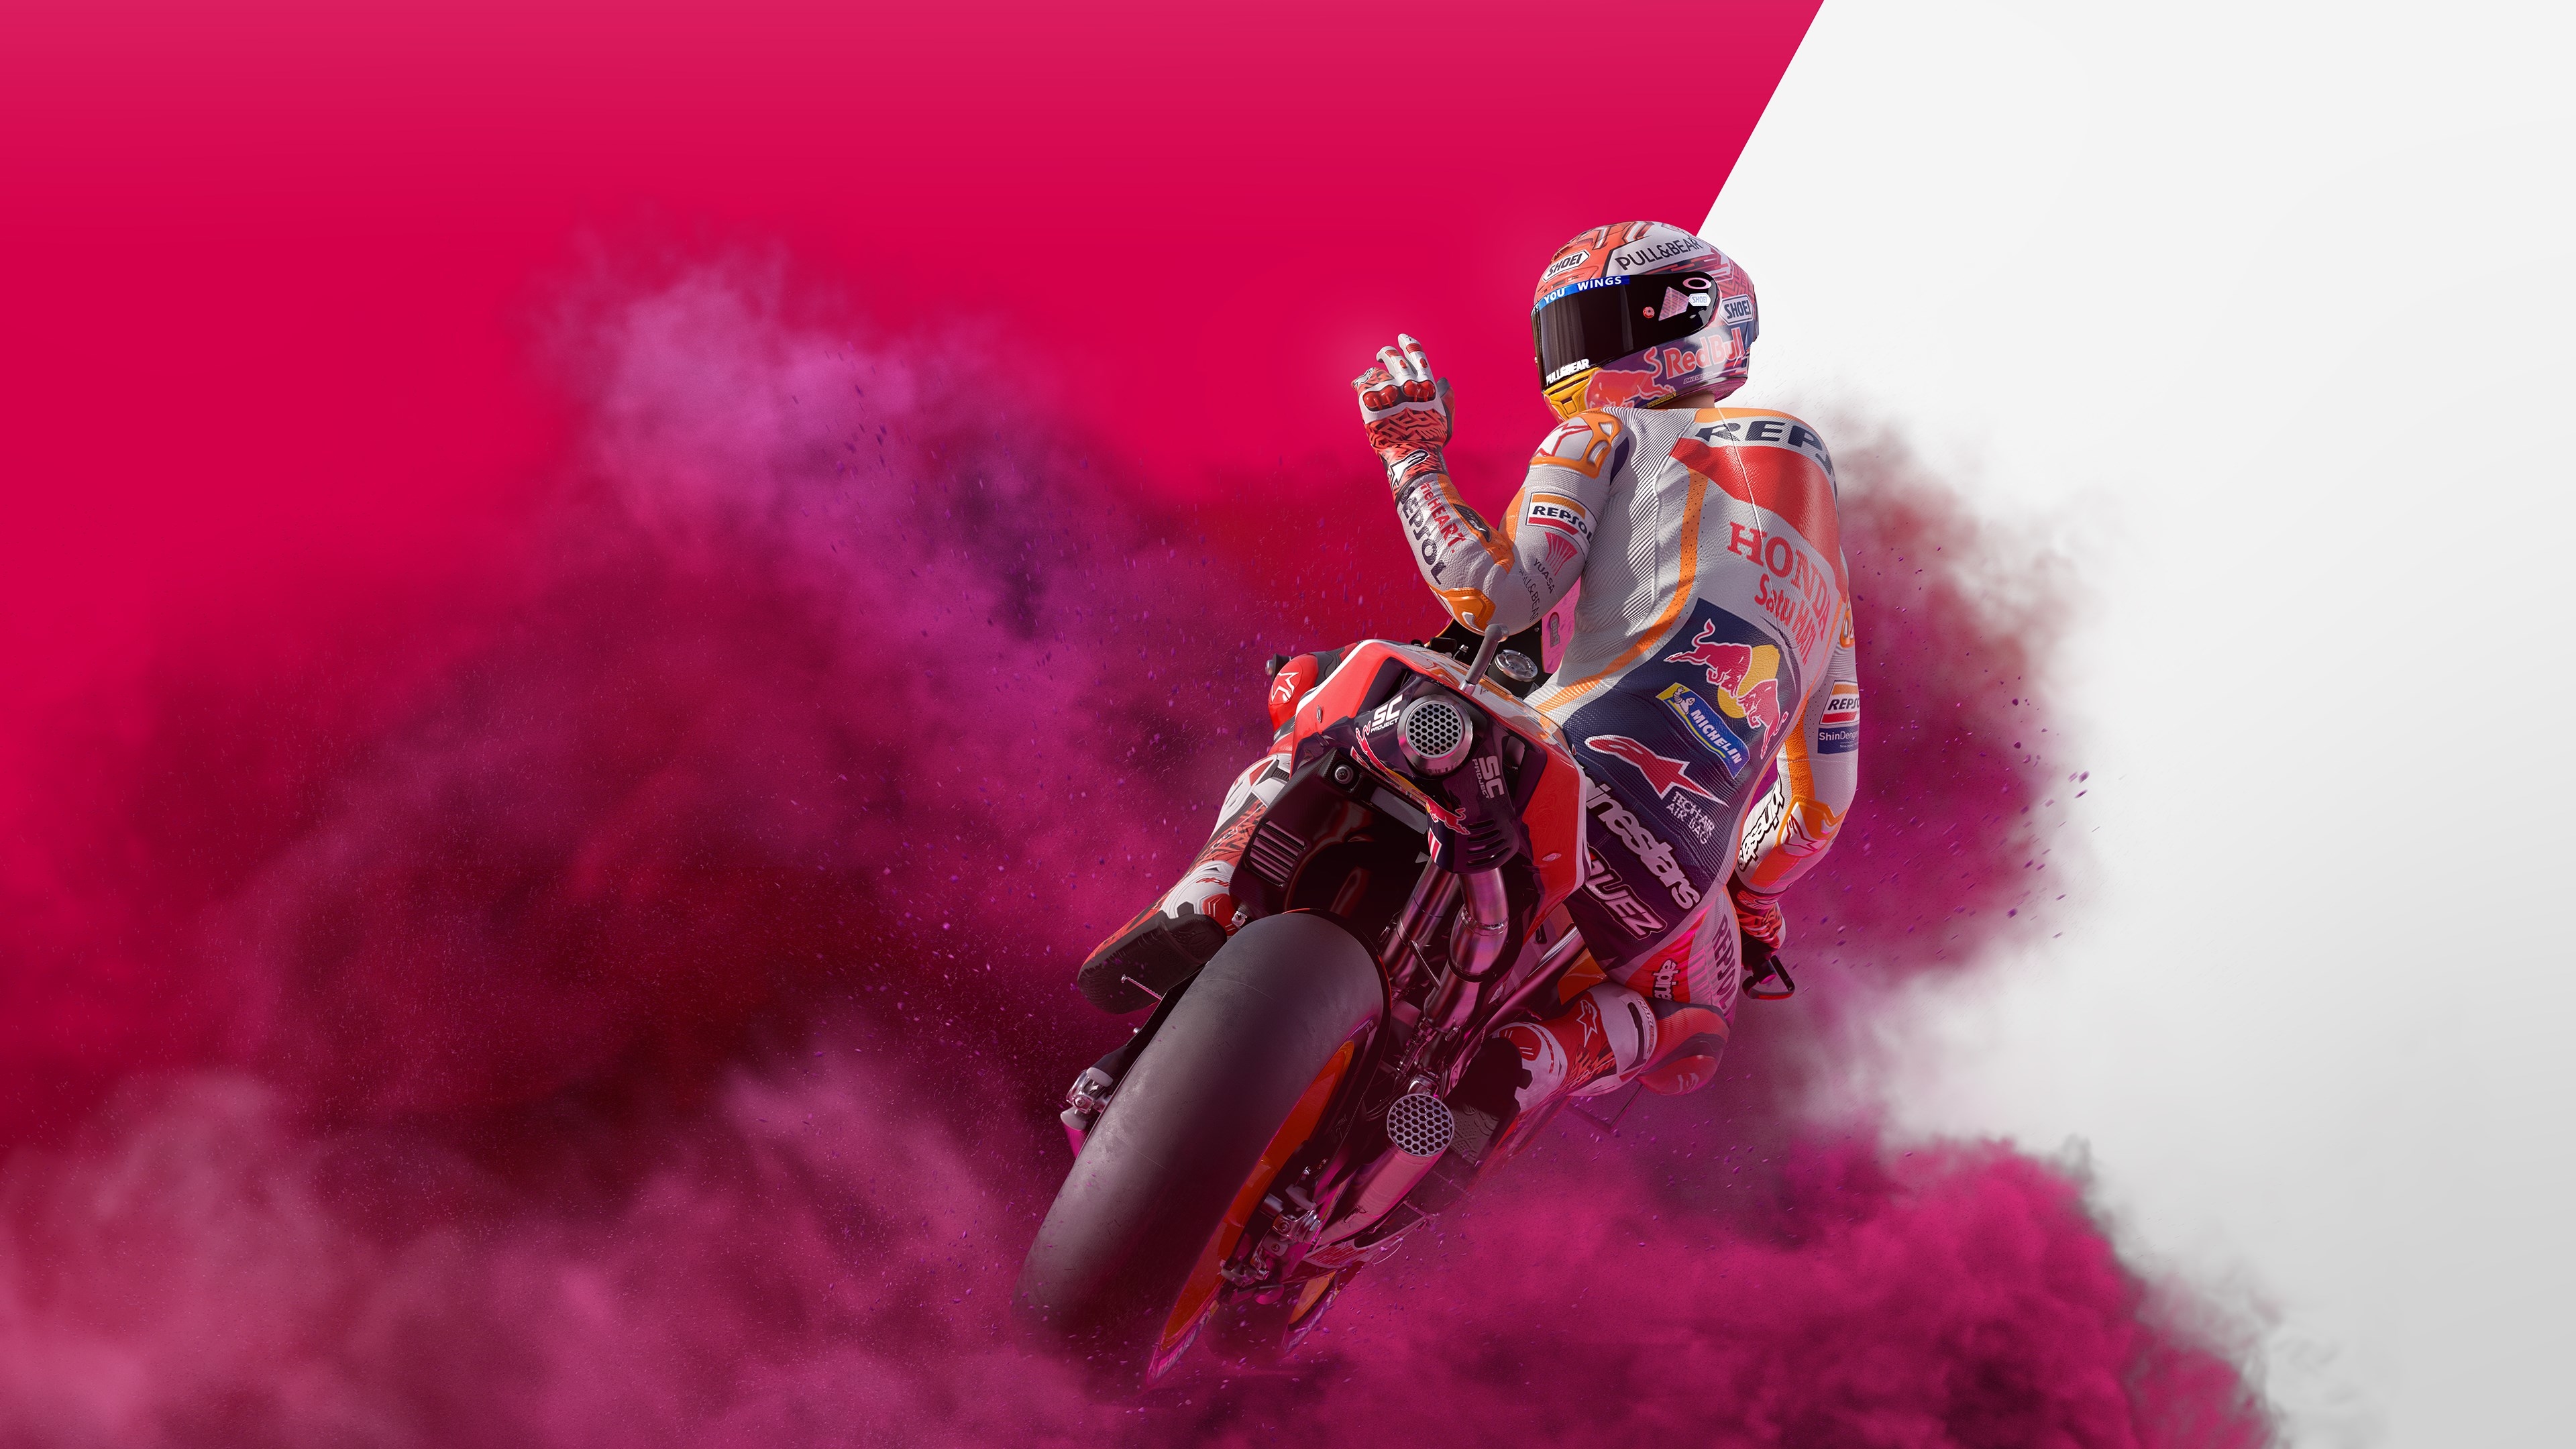 1080x2340 Motogp 19 Game 1080x2340 Resolution Wallpaper Hd Games 4k Wallpapers Images Photos And Background